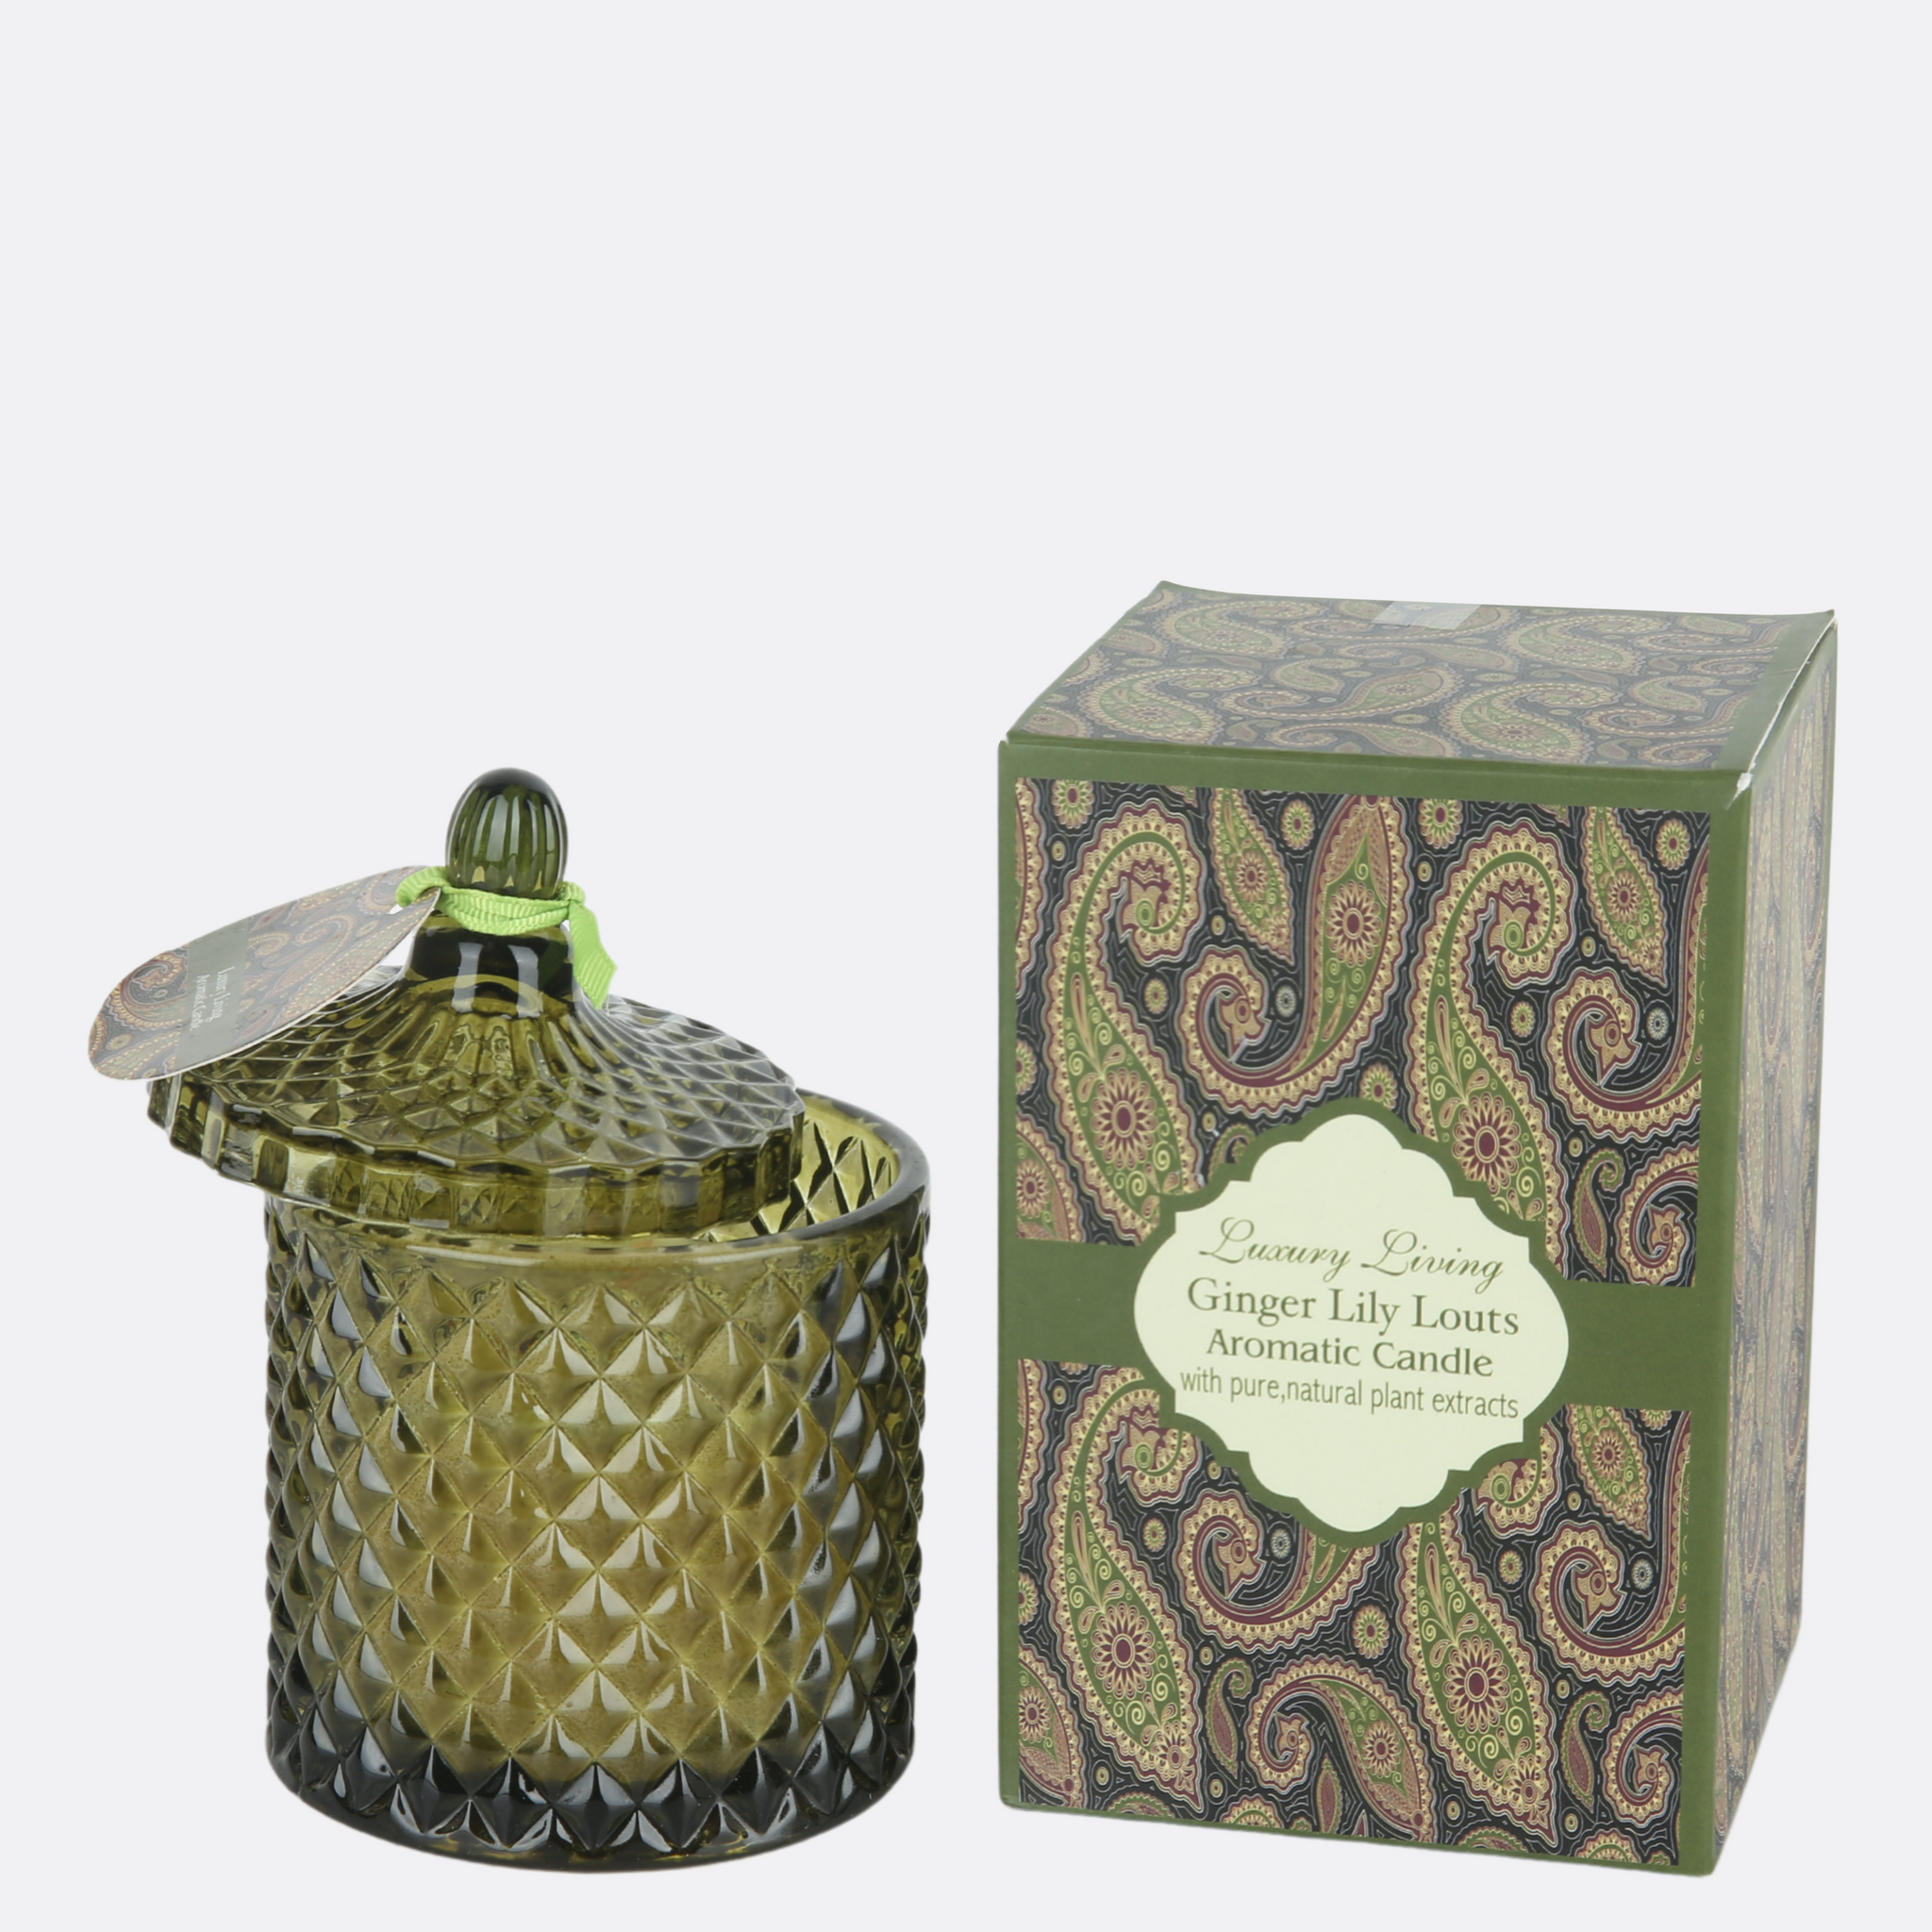 Ginger Lily Louts Aromatic Candle